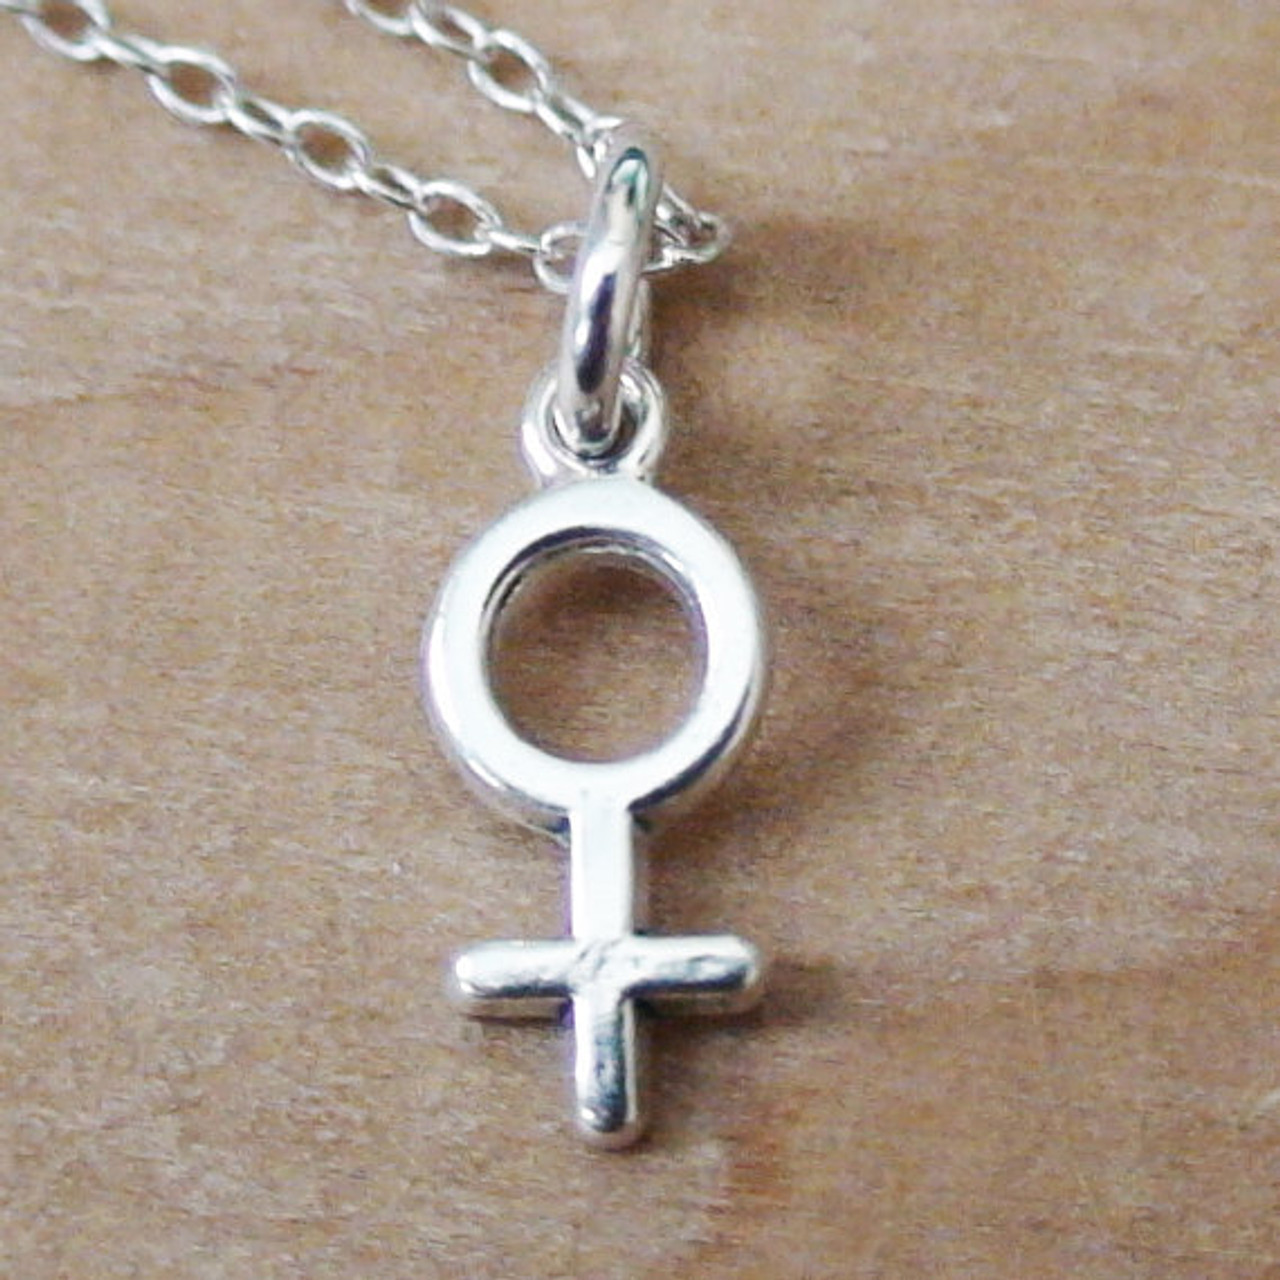 FEMALE SYMBOL - Sterling Silver Charm Necklace